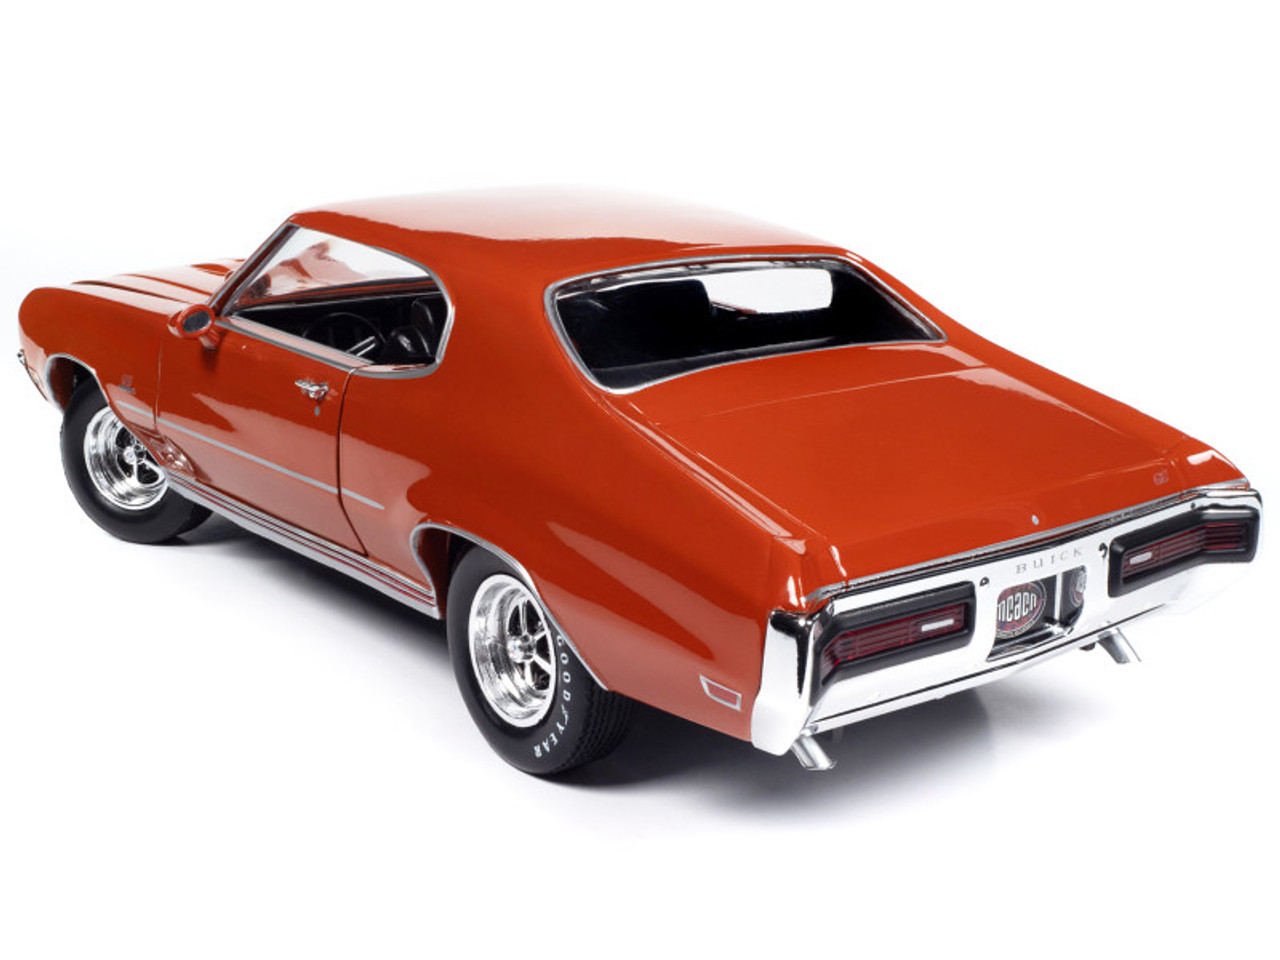 1972 Buick GS Stage 1 Flame Orange "Muscle Car & Corvette Nationals" (MCACN) "American Muscle" Series 1/18 Diecast Model Car by Auto World